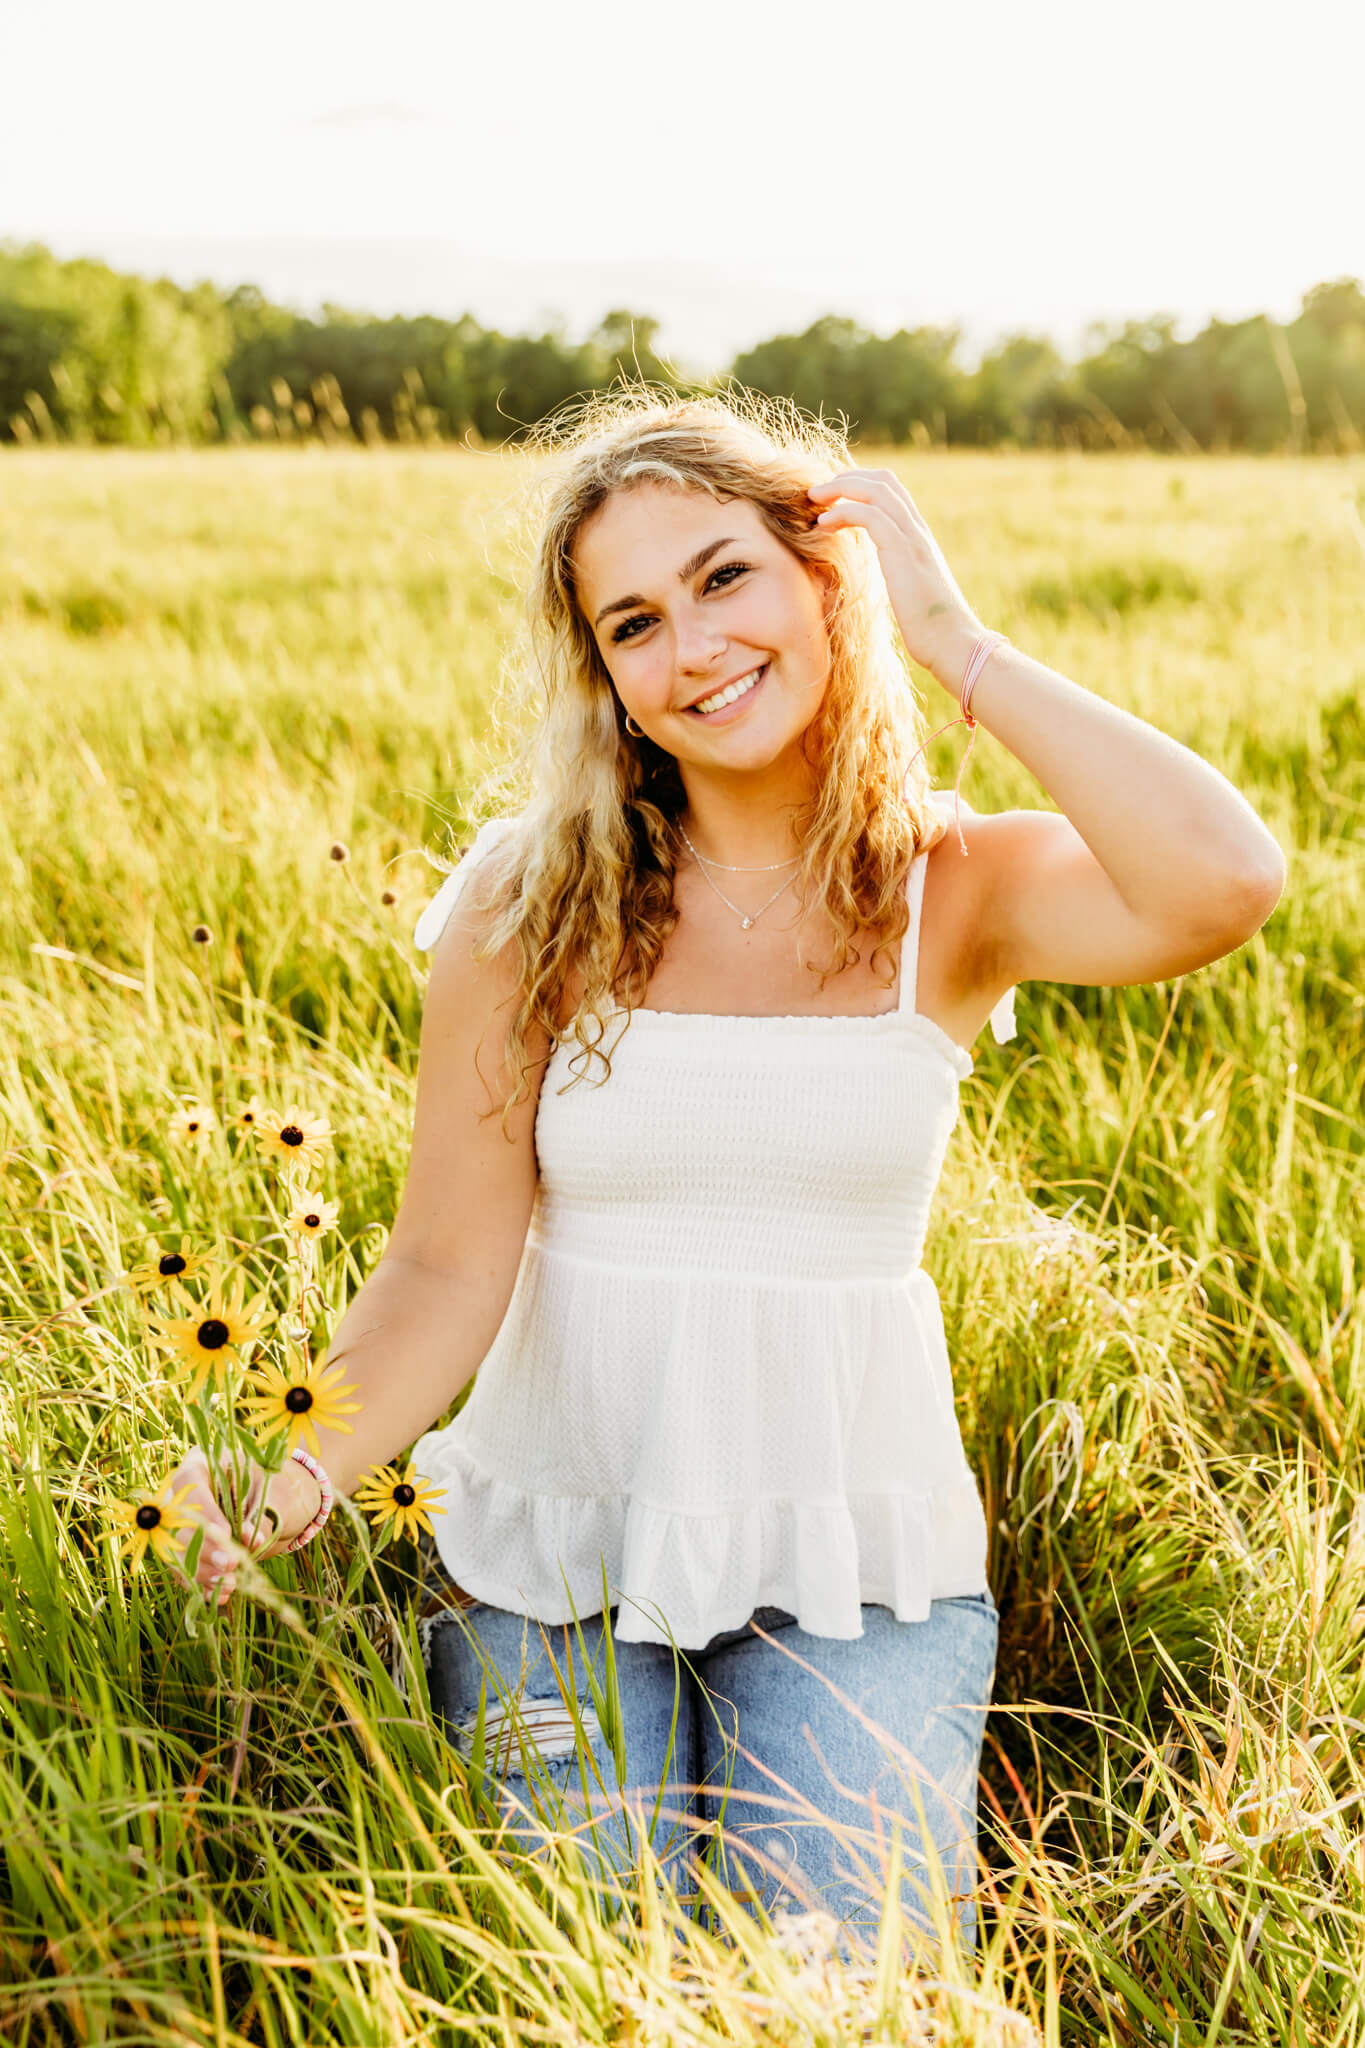 teen girl in a white top and jeans, pulling her hair behind her ears as she smiles and plays with the wildflowers for a blog post about tanning in Oshkosh WI